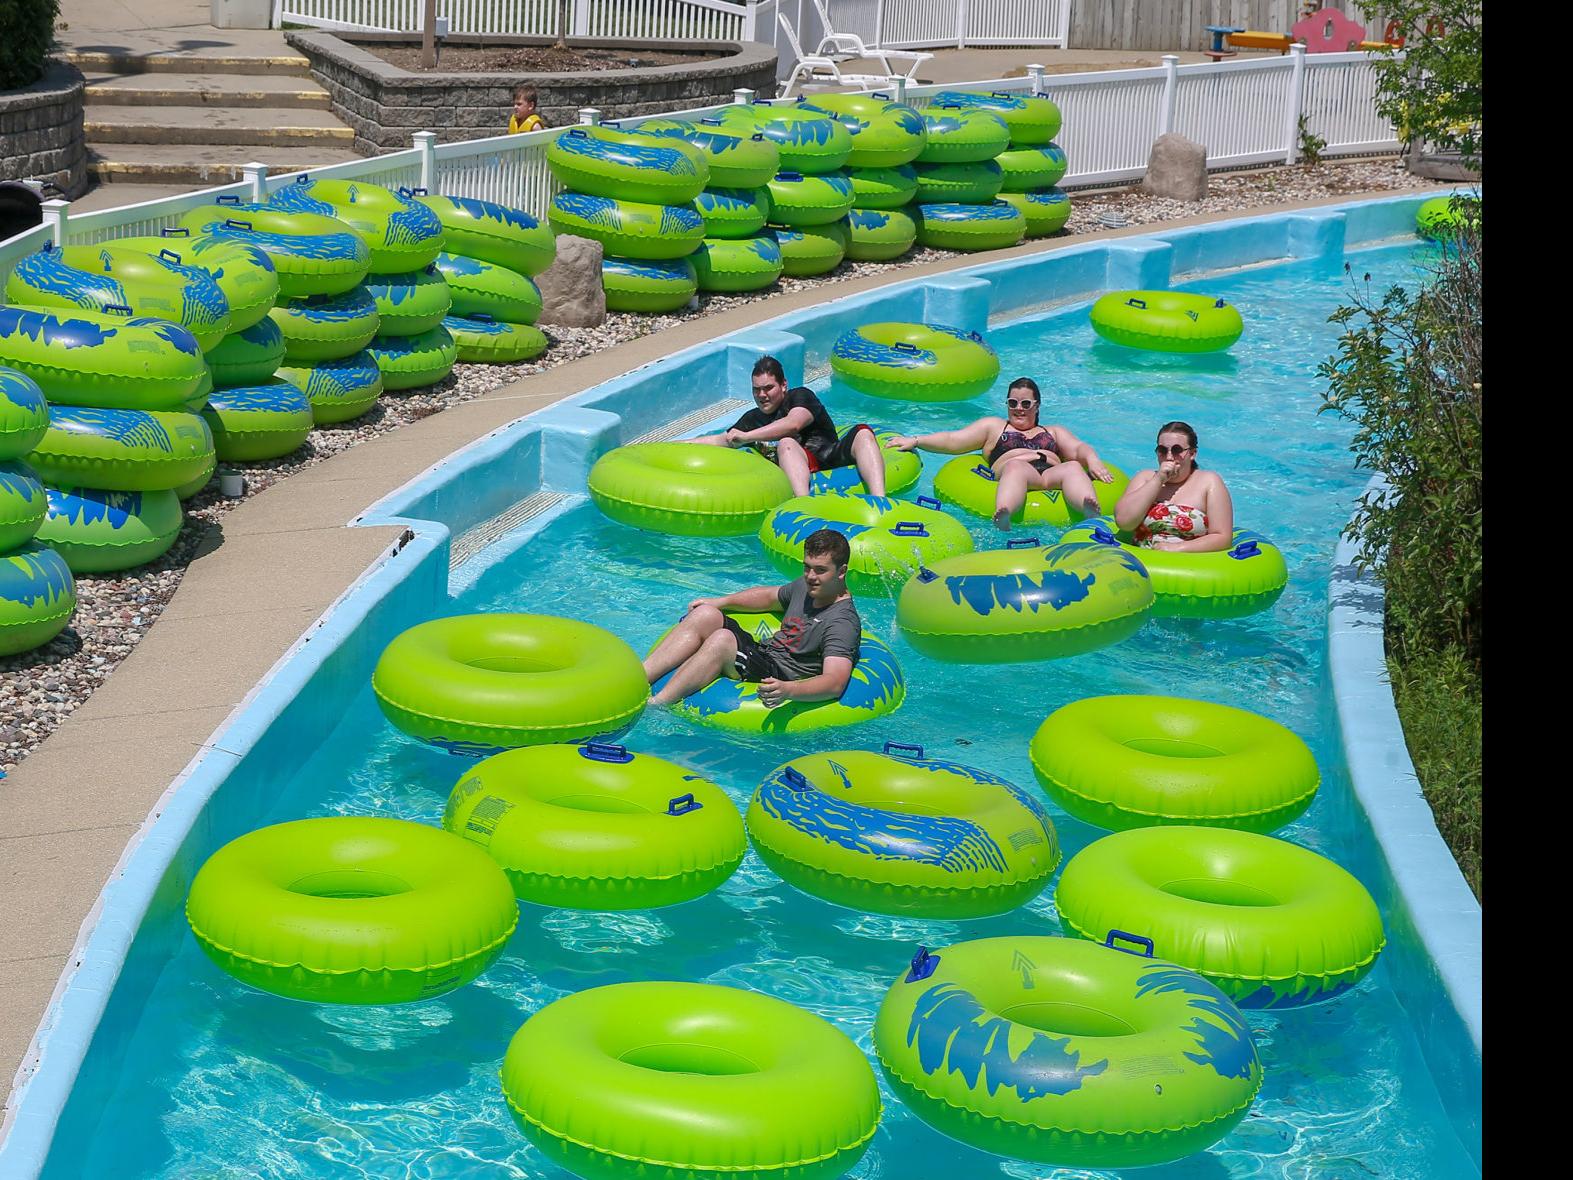 Lake County Parks Has Come A Long Way In 50 Years With Deep River Waterpark Its High Point And Plans To Grow More Northwest Indiana History Nwitimes Com